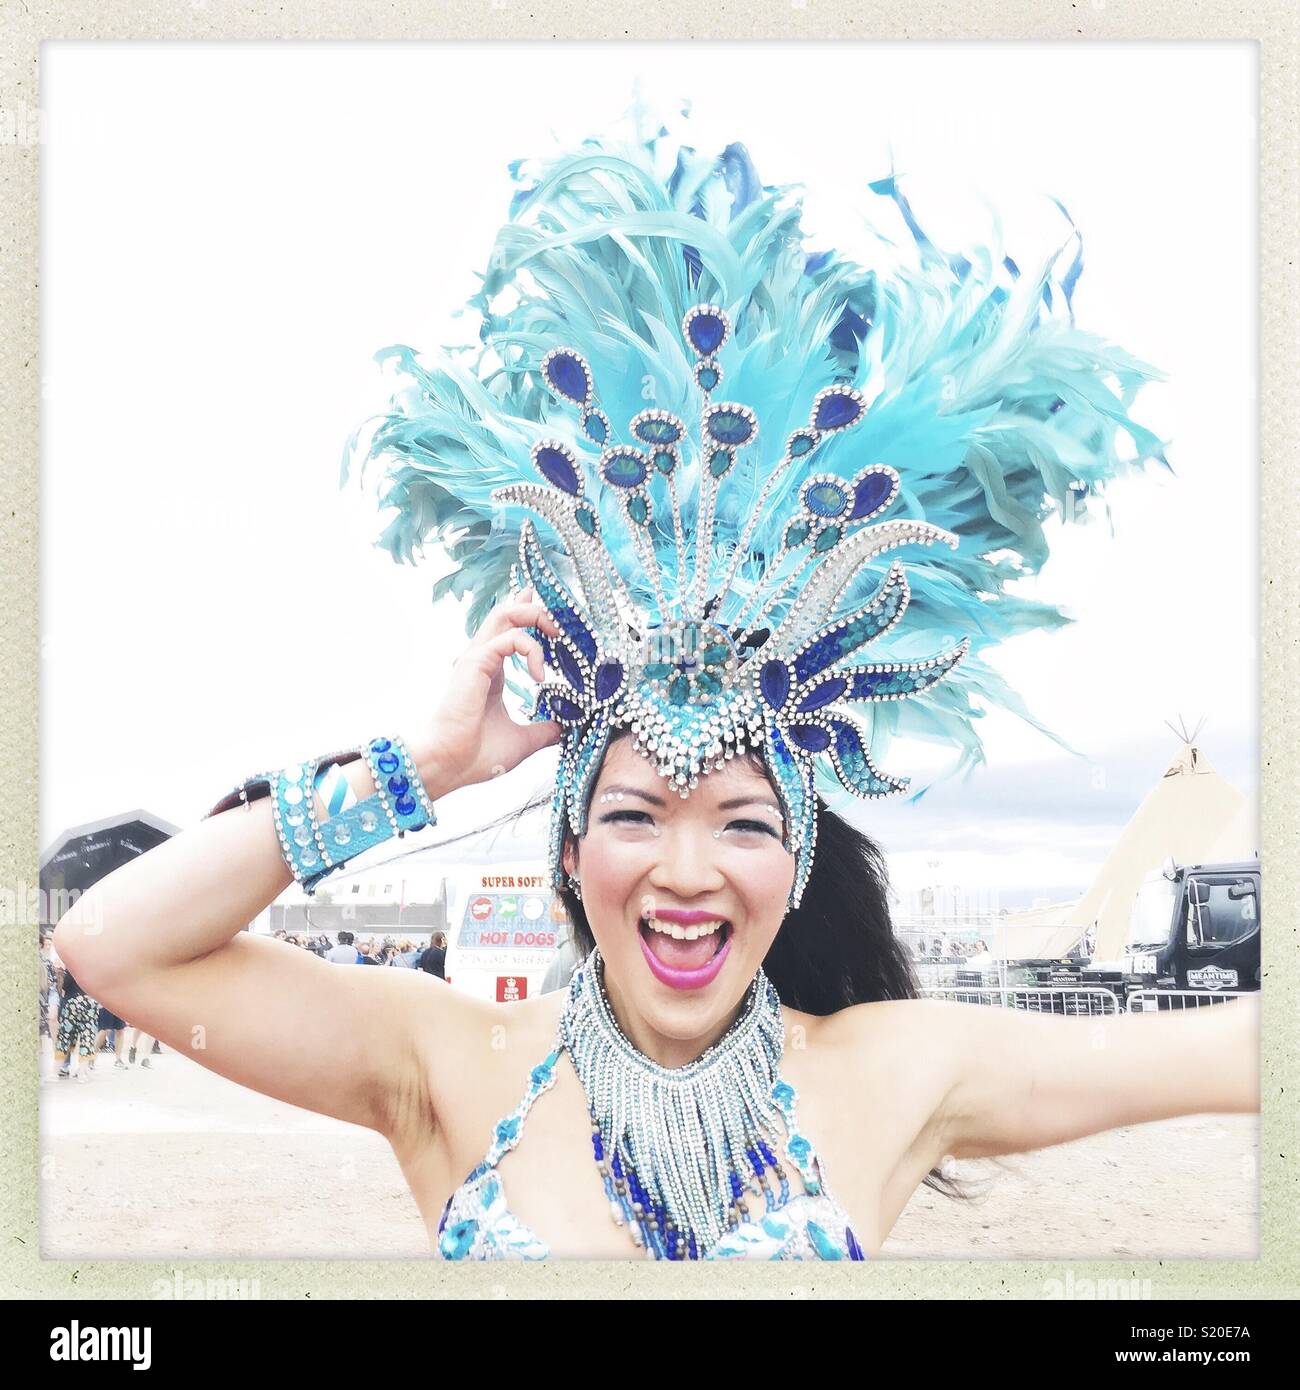 Showgirl at the Liverpool sound city music festival, Liverpool, England, May 2017 Stock Photo